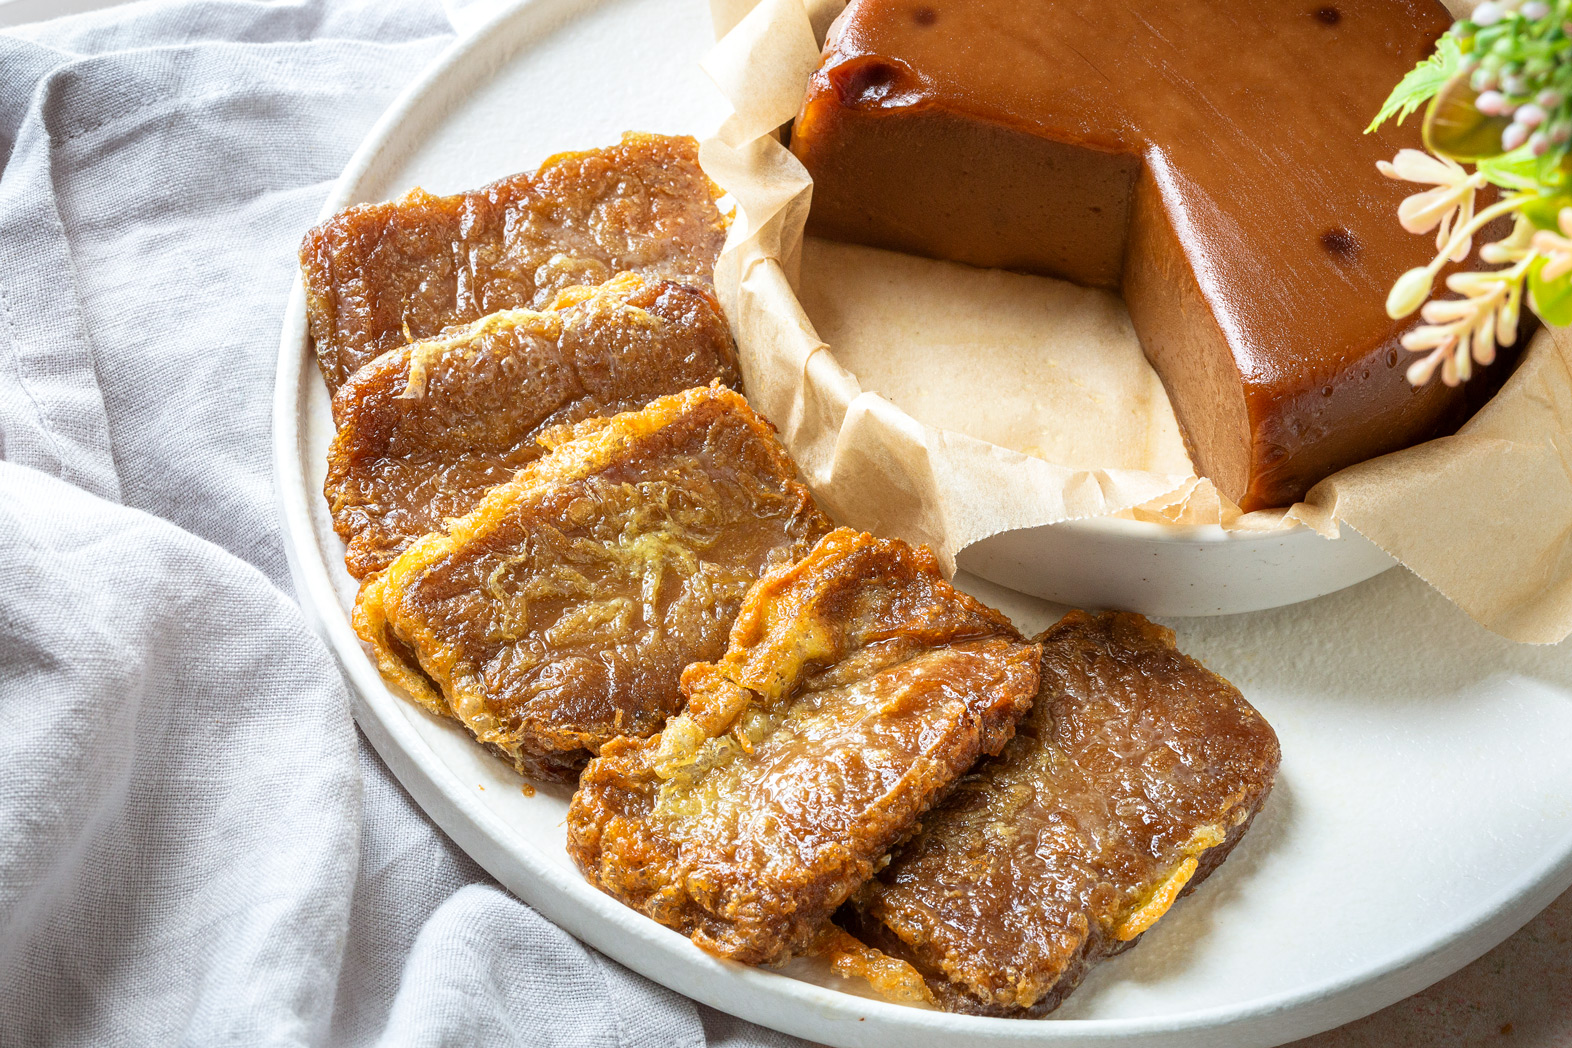 Chinese sweet rice cake - aka nian gao- steamed then pan-fried with egg coating.